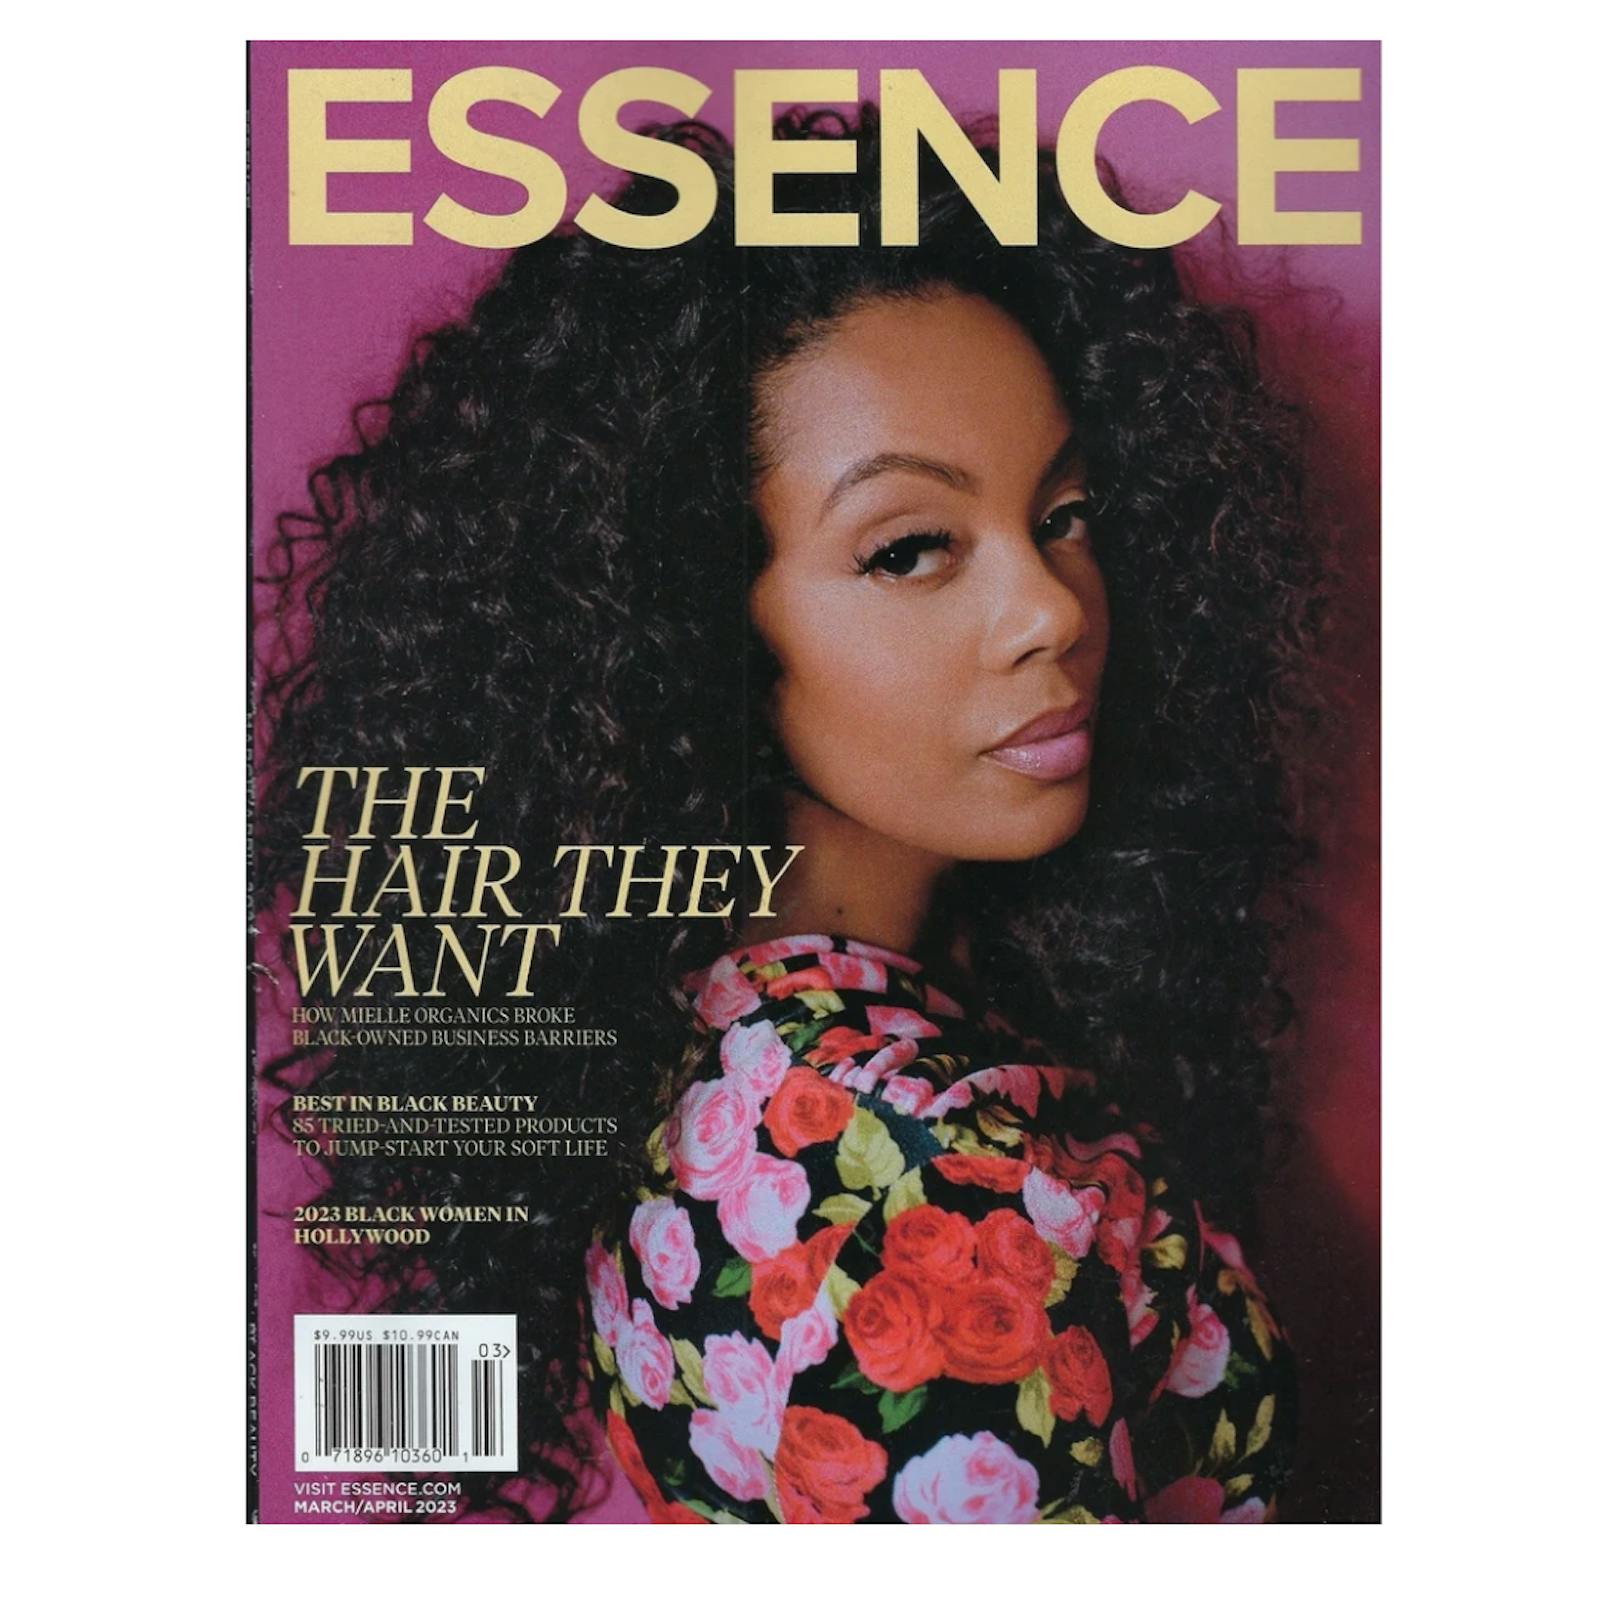 Check out our ESSENCE magazine: #SoftLife feature!